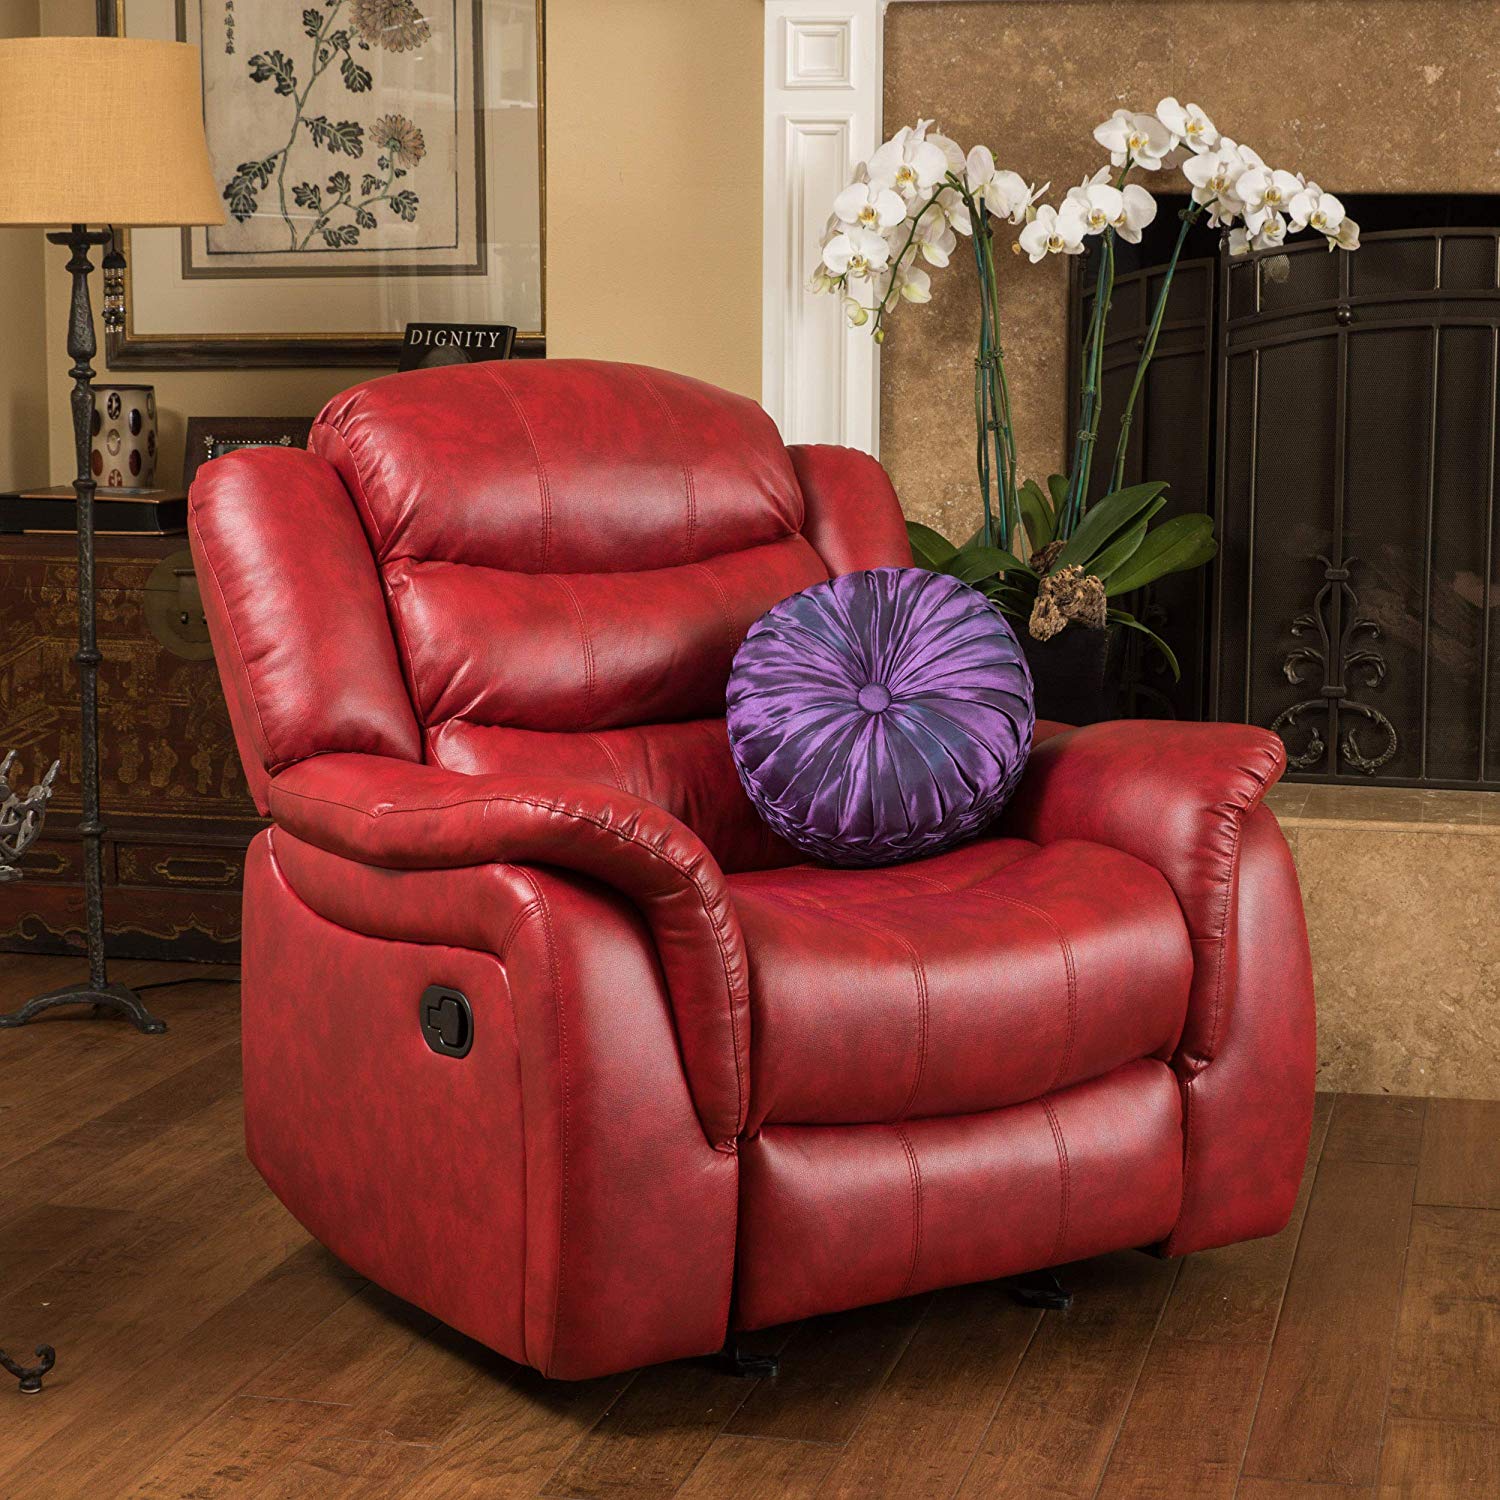 Top 10 Red Leather Recliner Chairs 2020 Reviews Guide Recliners Guide